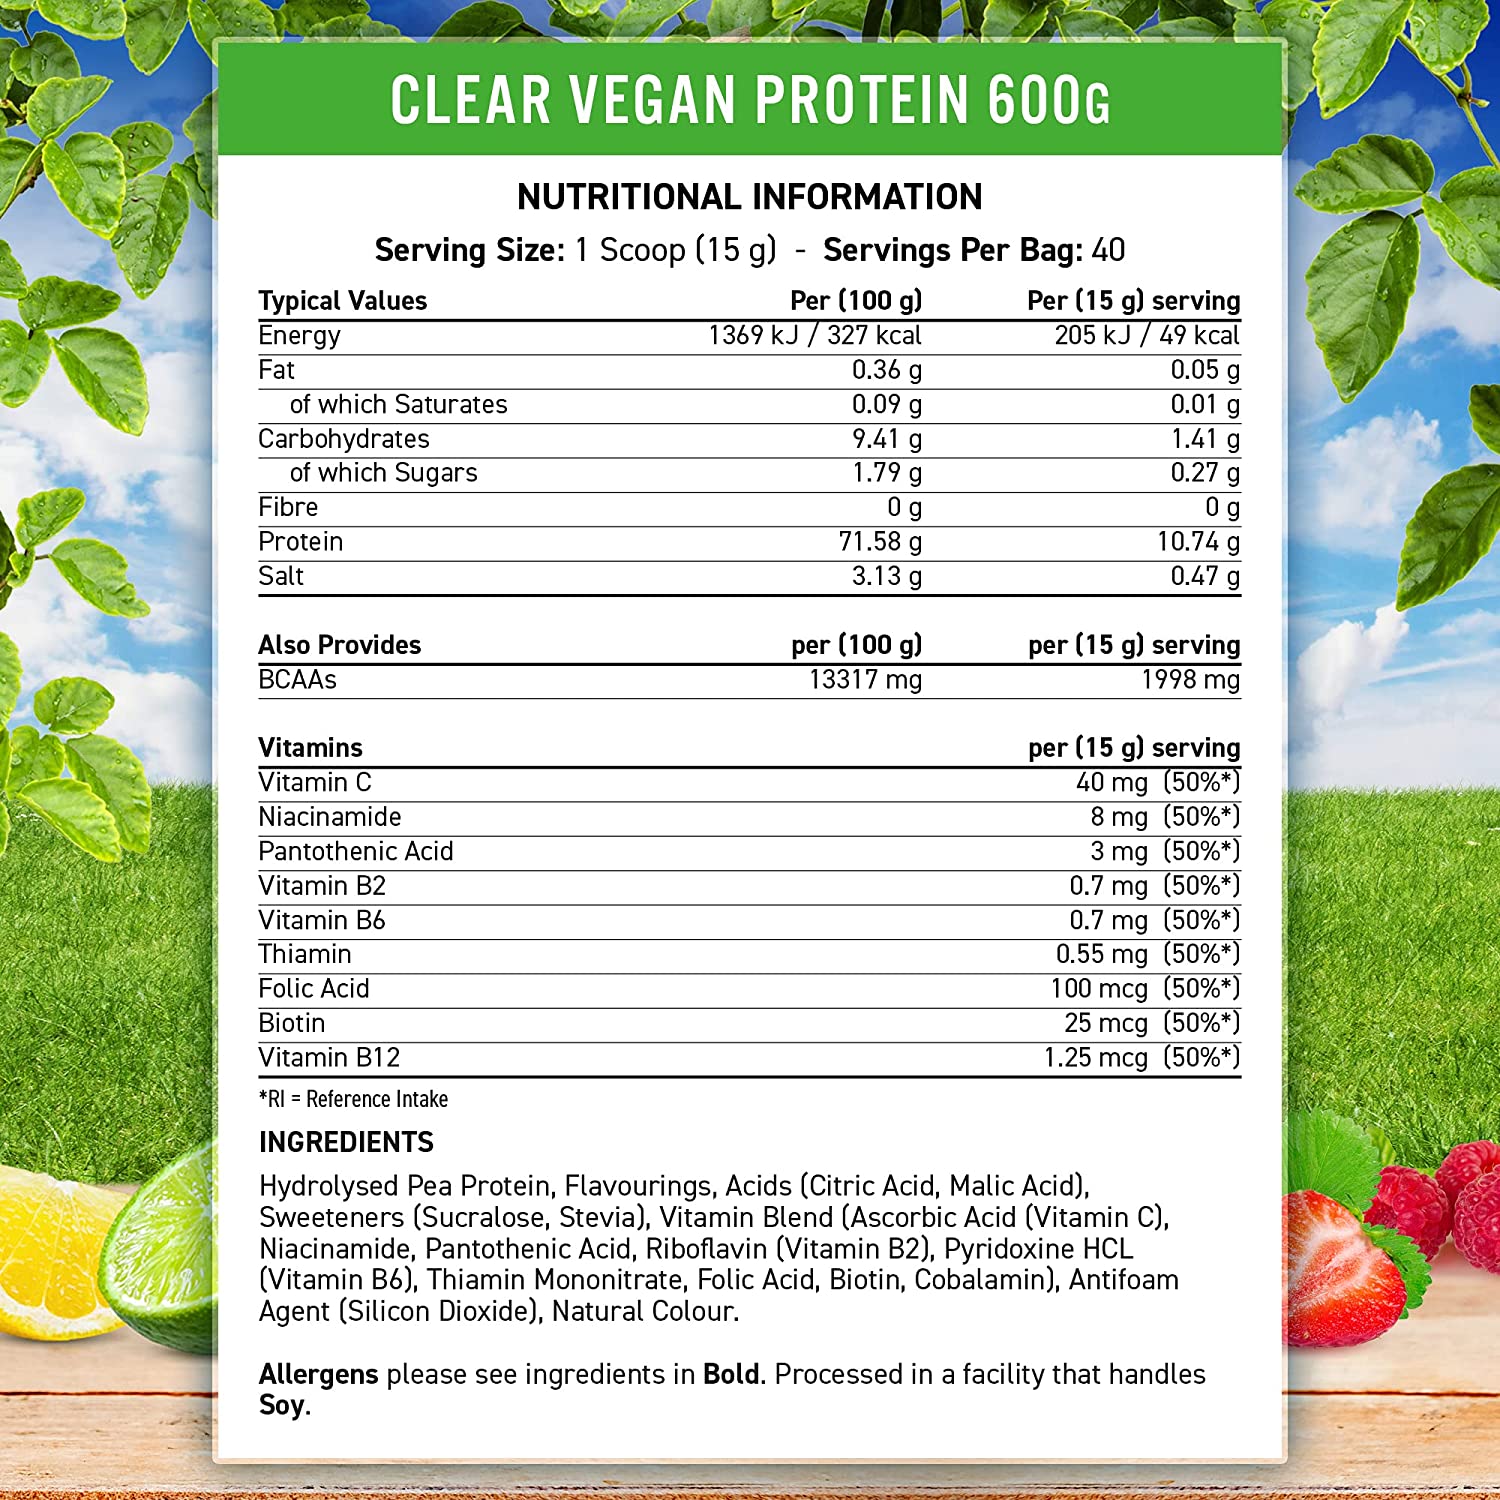 Applied Nutrition Clear Vegan Protein Isolate